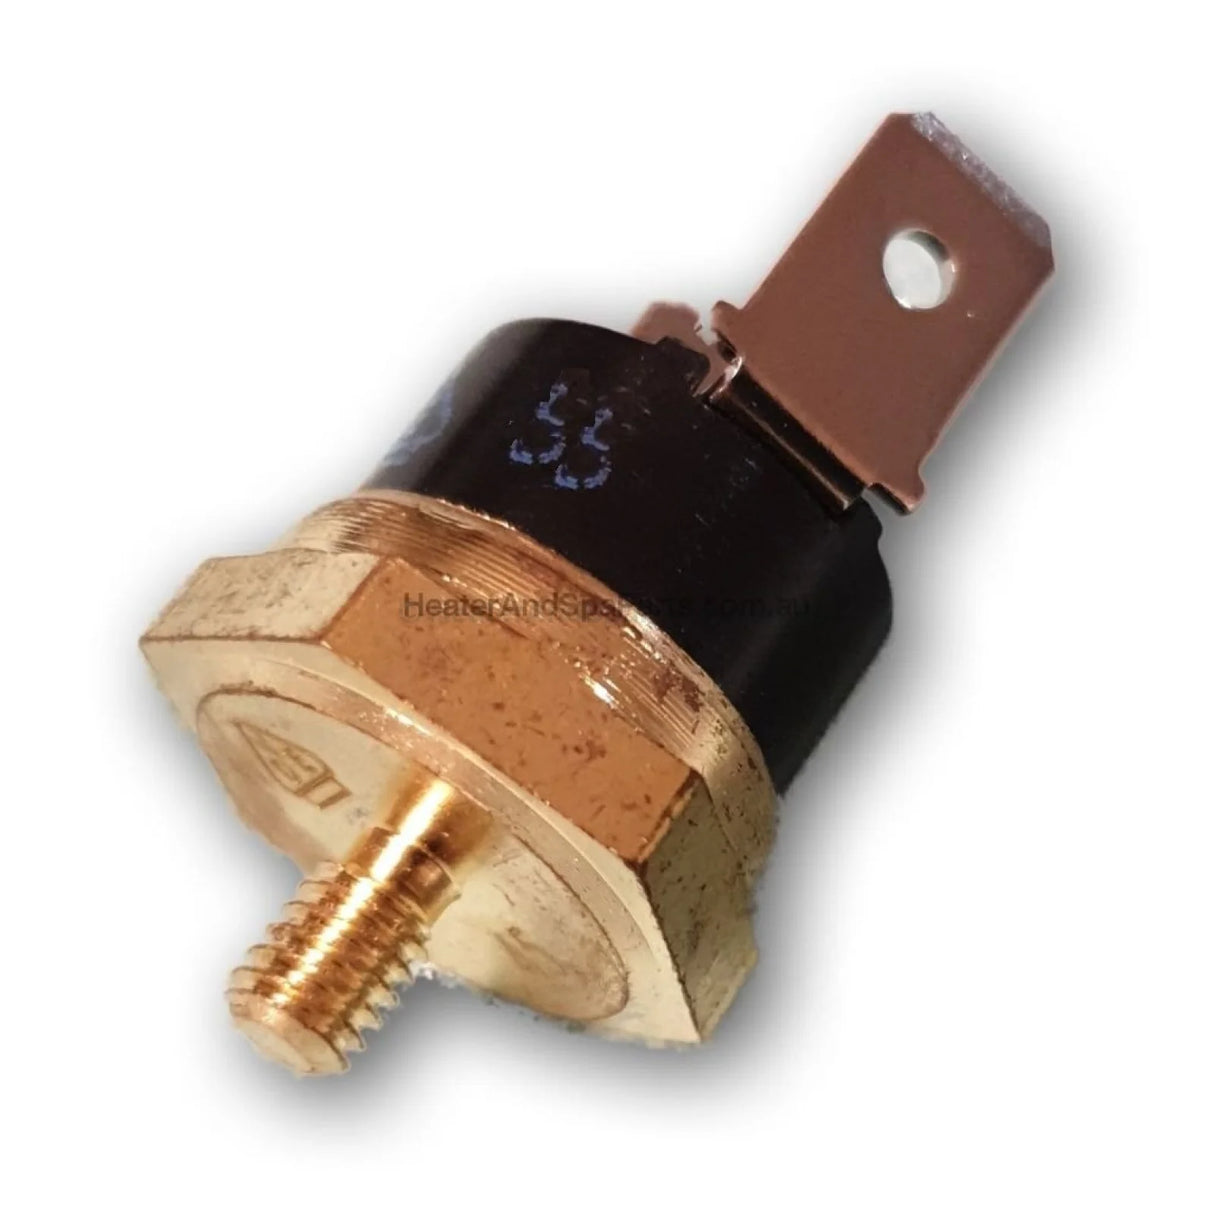 Hurlcon Astralpool Heater Hi-Limit Switch - 52-55°C - Outlet - F2 Errors - Heater and Spa Parts